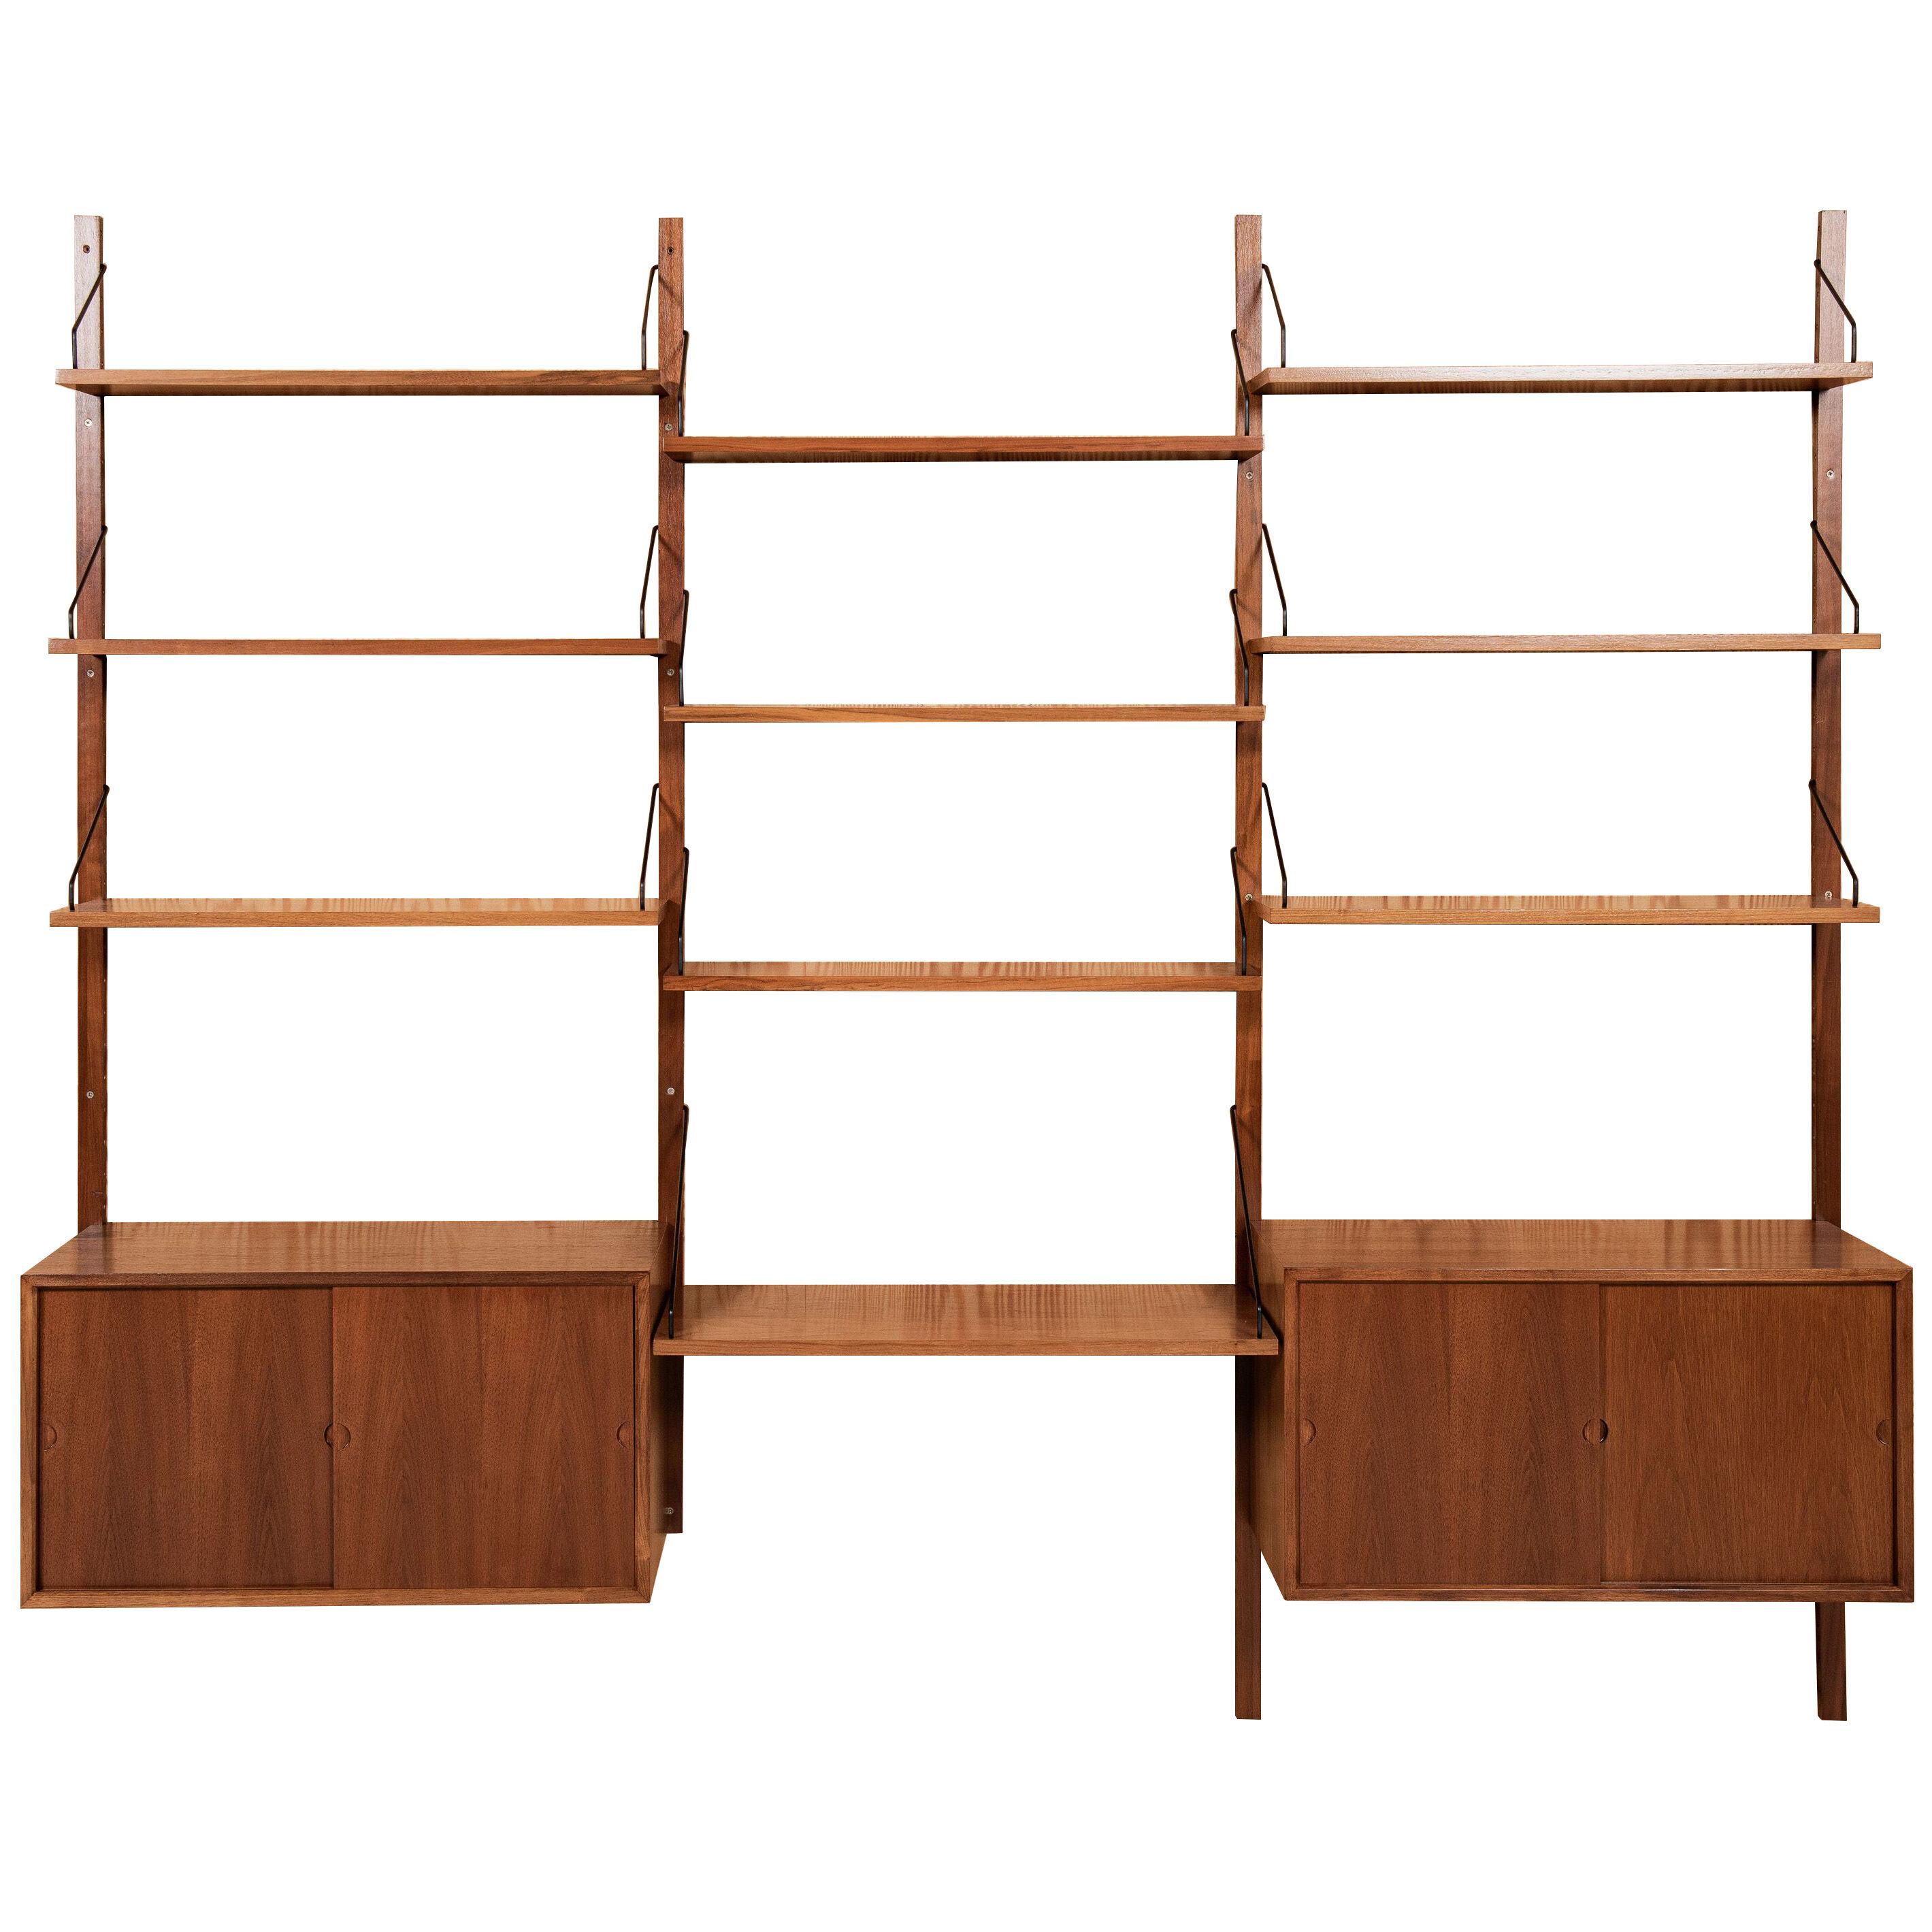 Midcentury Royal wall system in teak by Poul Cadovius, Denmark 1960s